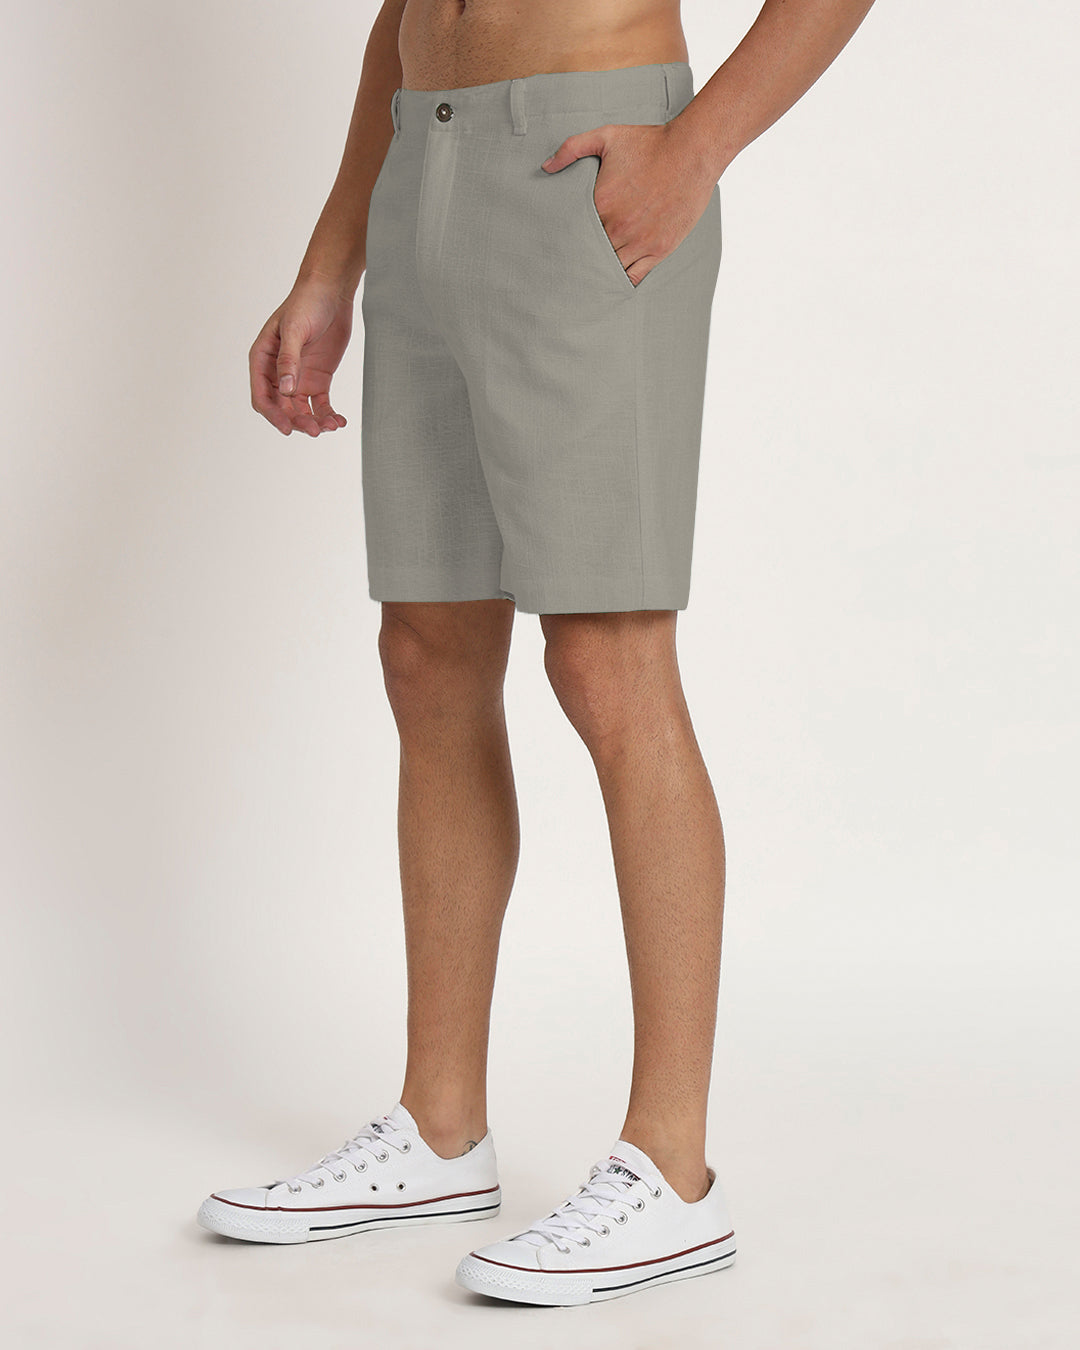 Combo : Ready For Anything Grey & Beige Men's Shorts